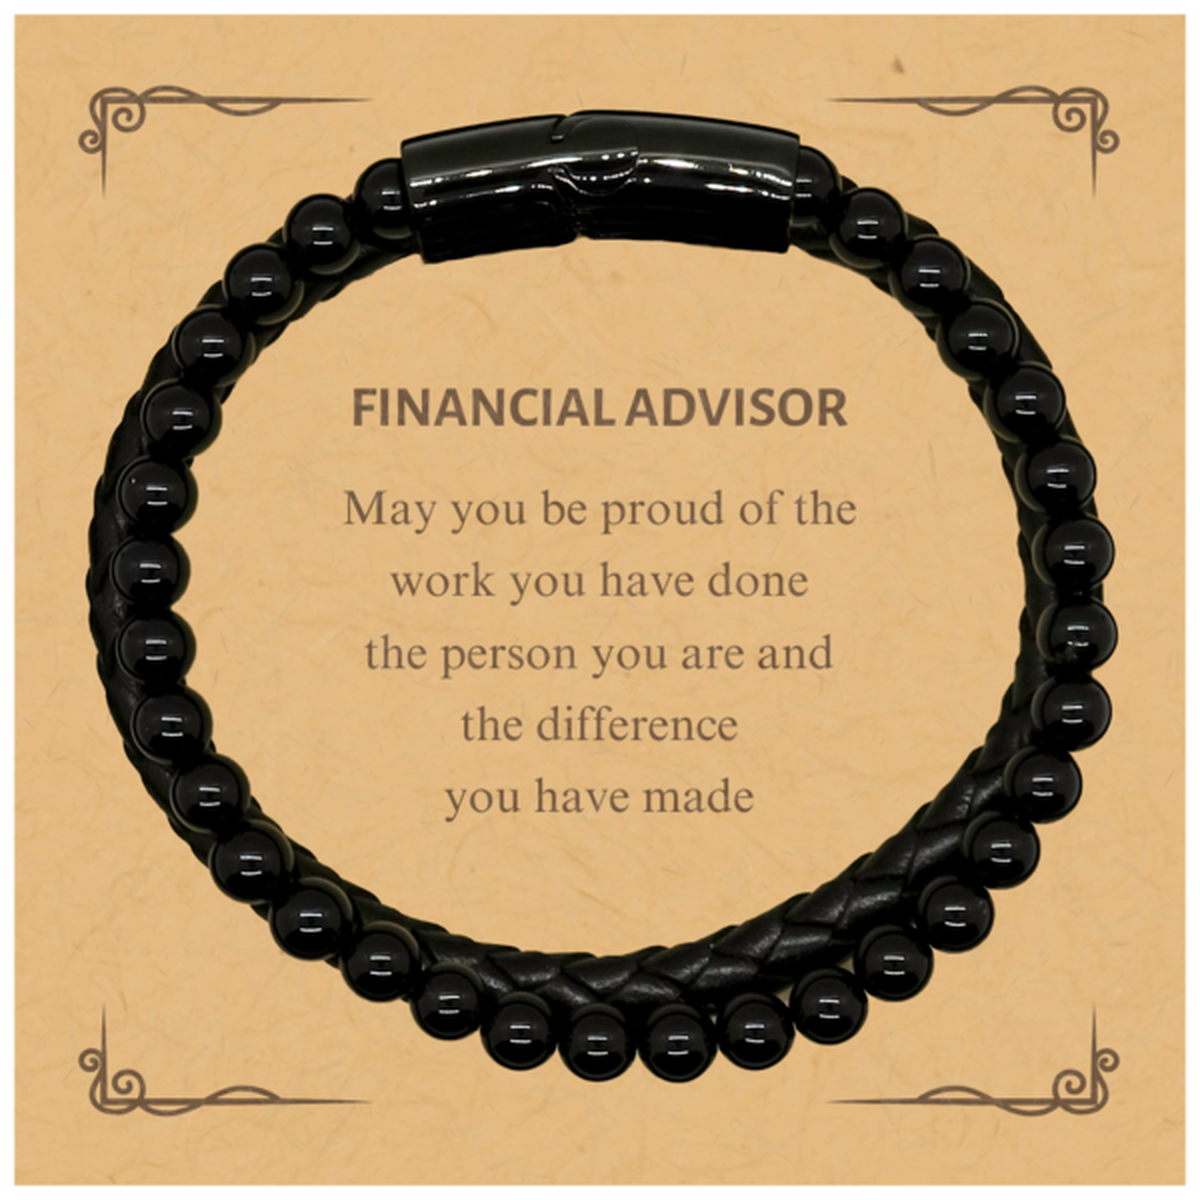 Financial Advisor May you be proud of the work you have done, Retirement Financial Advisor Stone Leather Bracelets for Colleague Appreciation Gifts Amazing for Financial Advisor